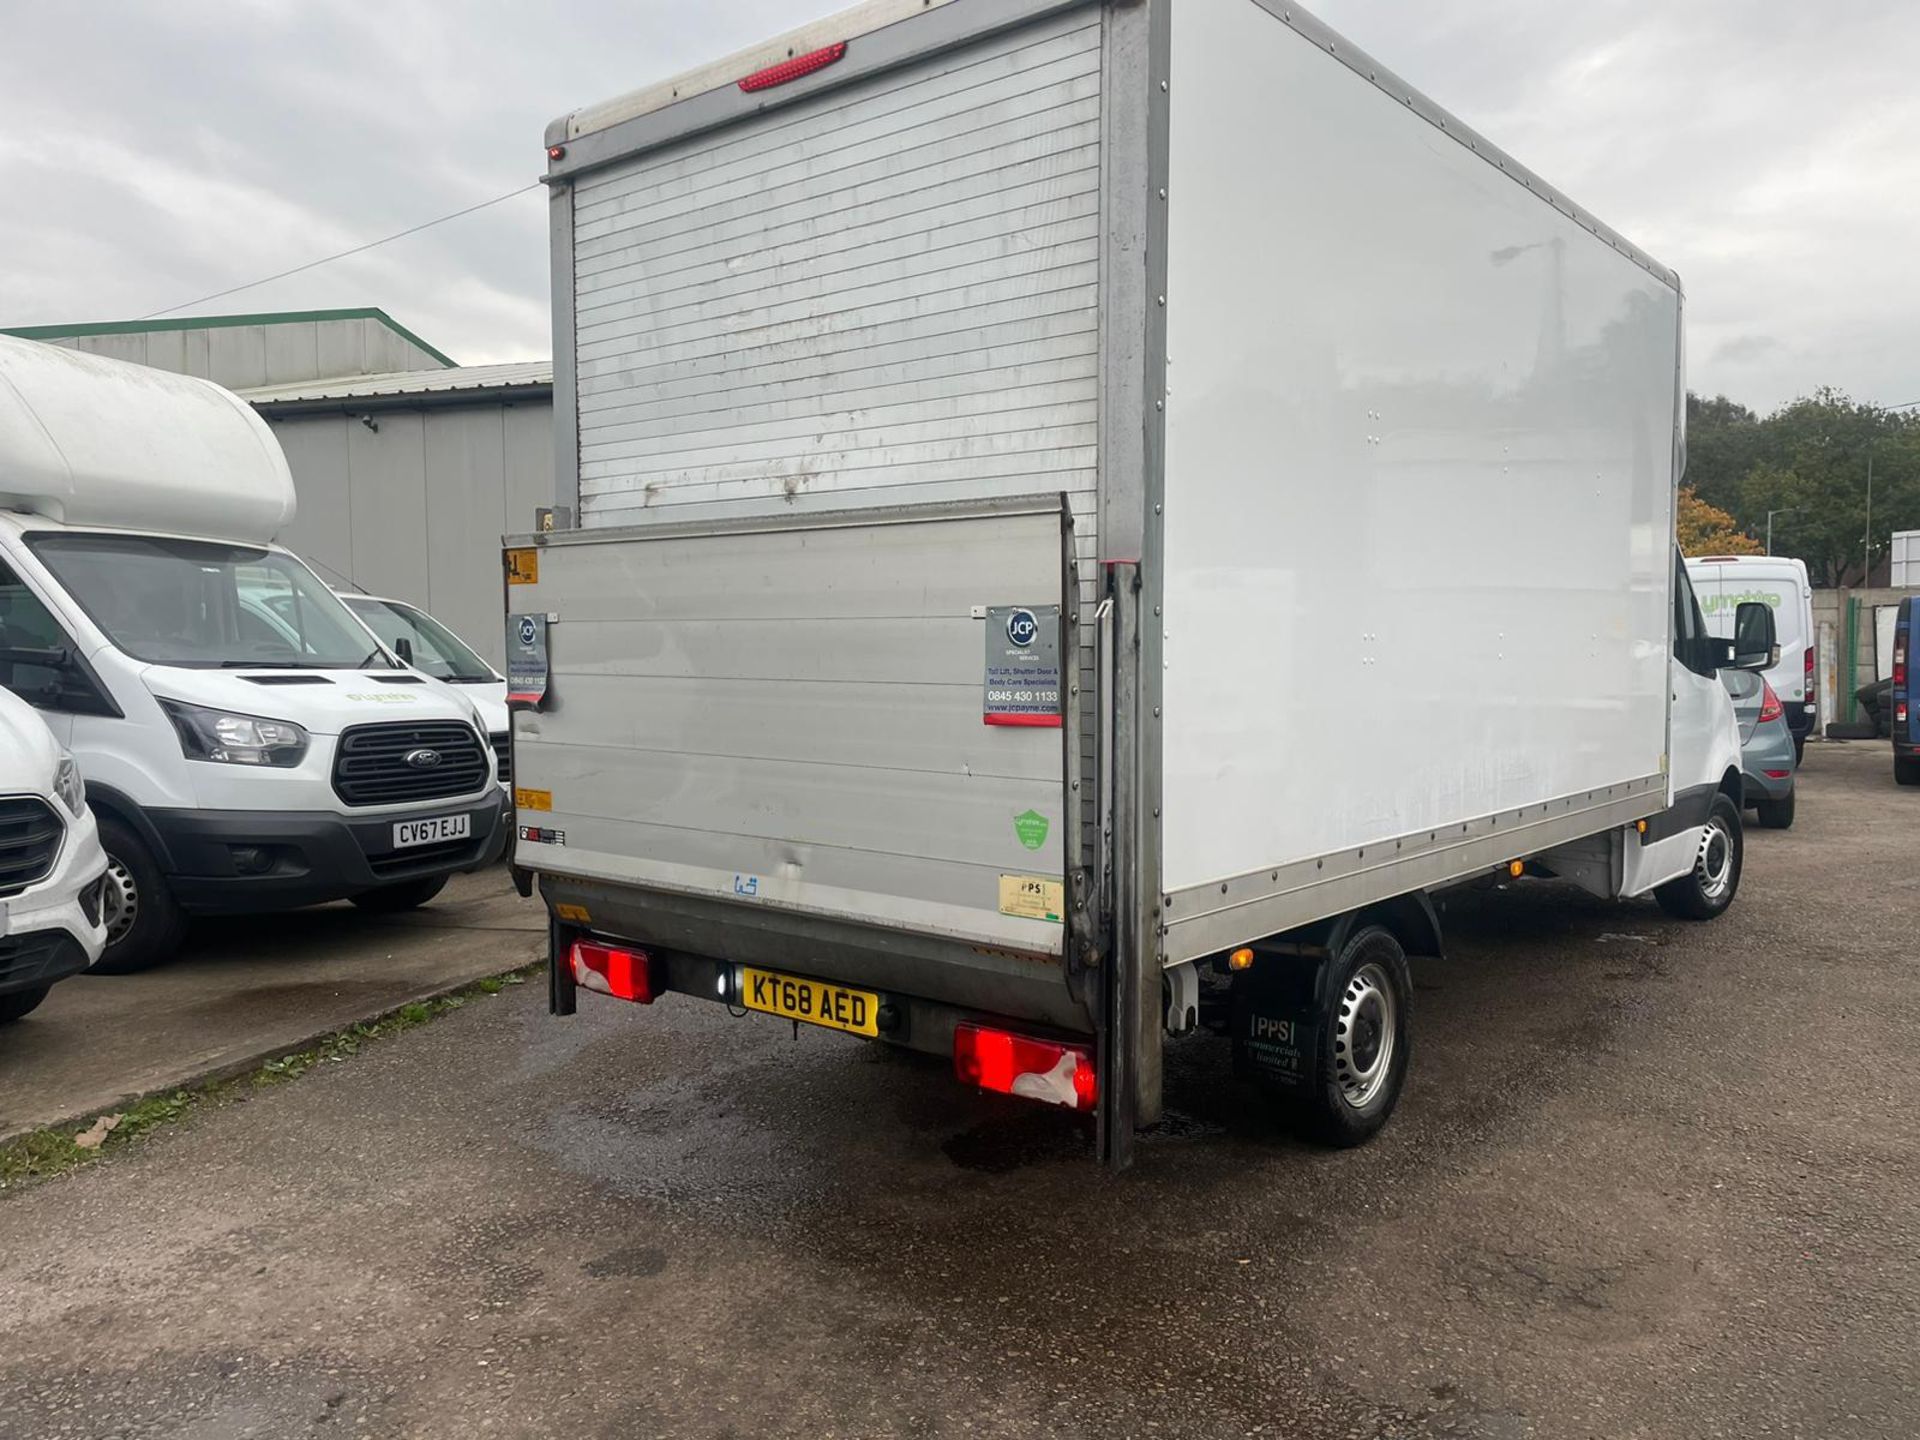 2018 MERCEDES SPRINTER 314 CDTI LUTON WITH TAIL LIFT - 108,356 WARRANTED MILES - 2.2 EURO 6 ENGINE  - Image 10 of 10